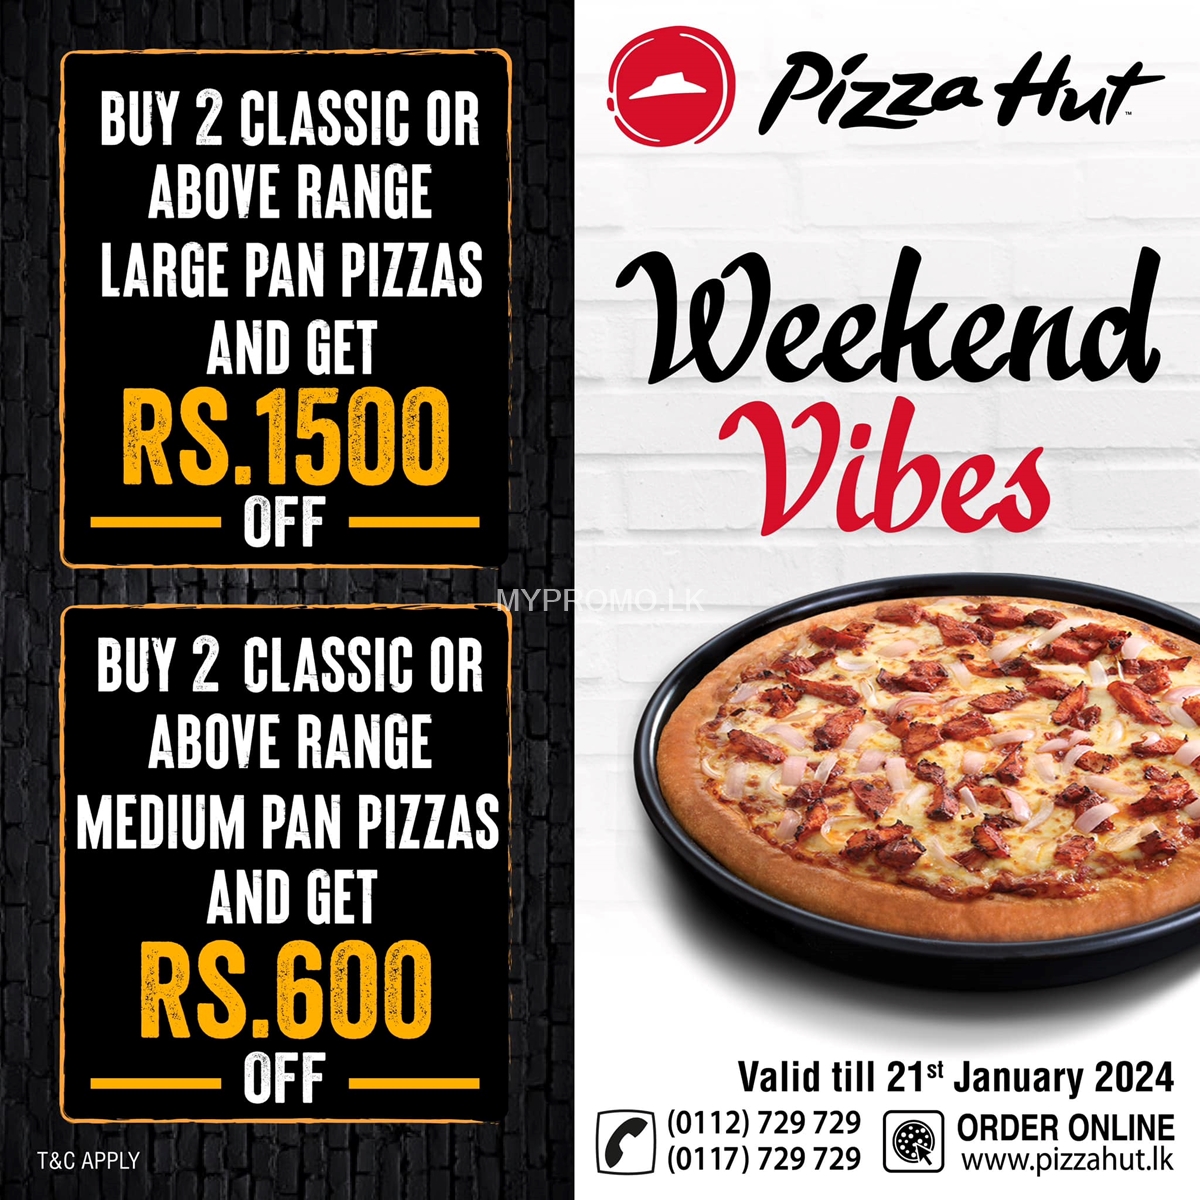 Weekend Vibes at Pizza Hut